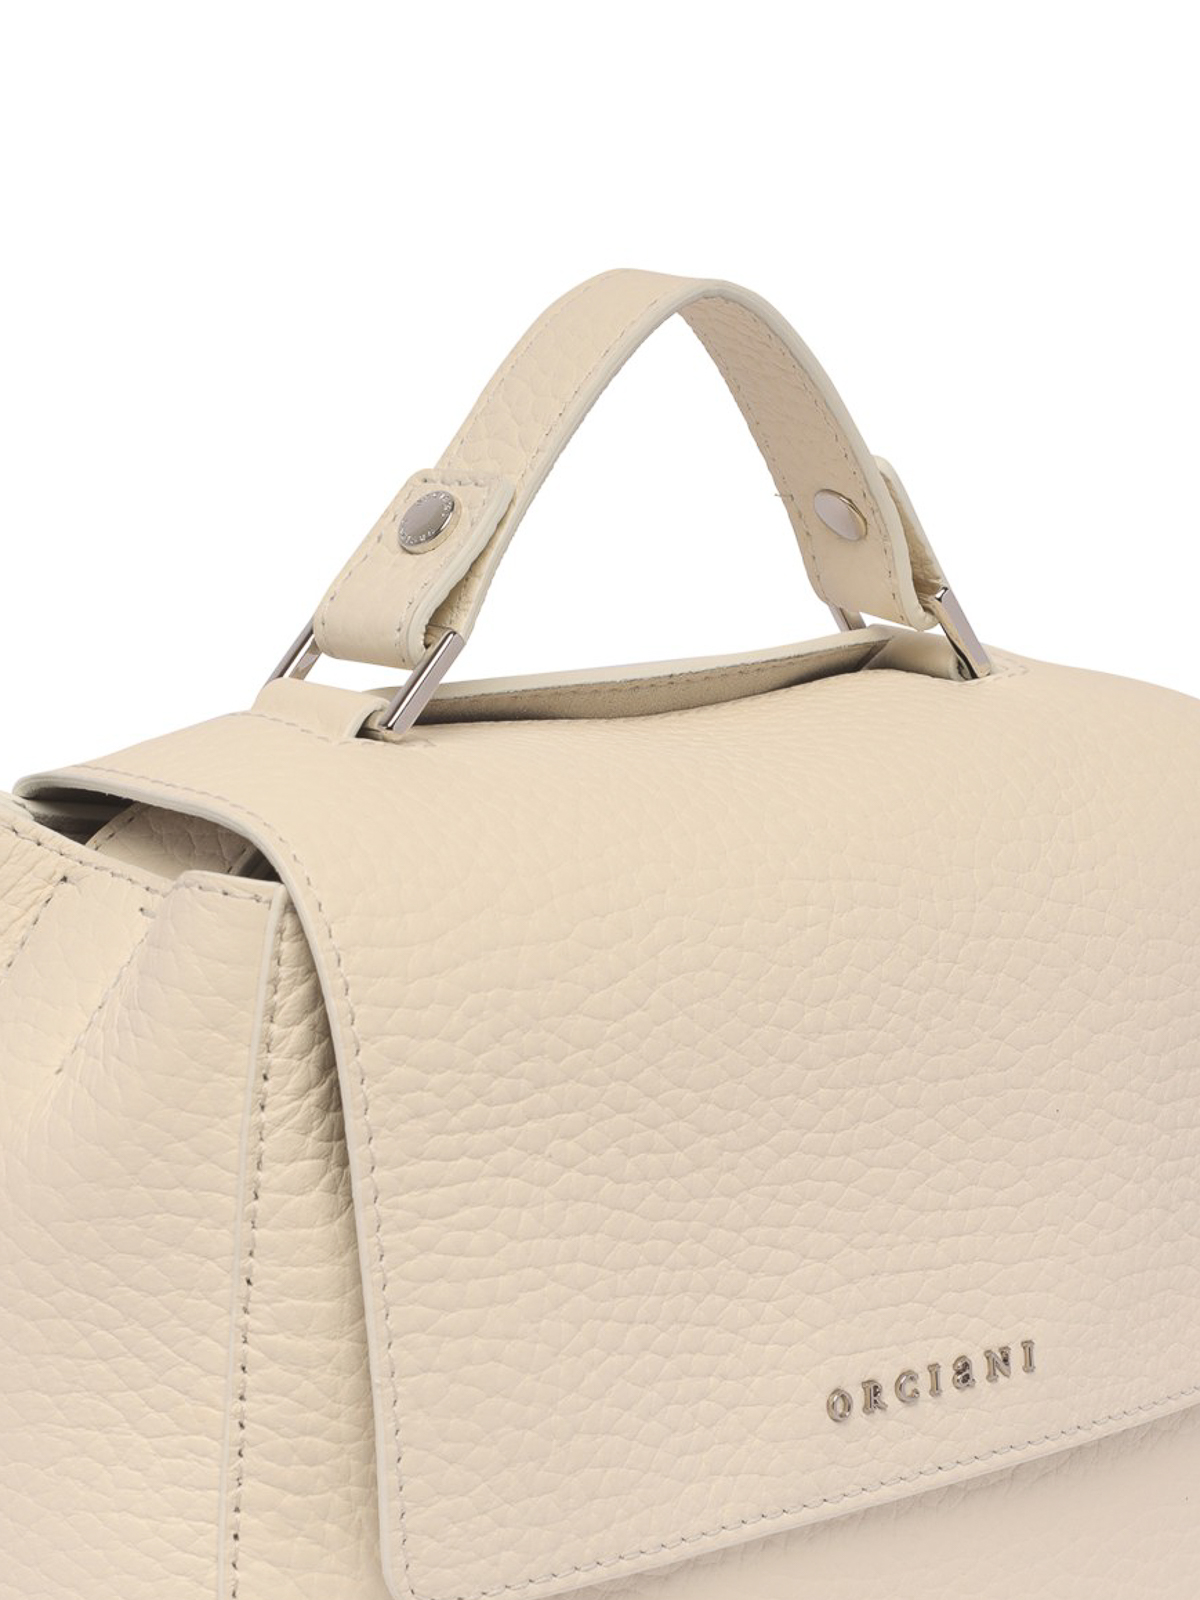 Shop Orciani Sveva Soft Hammered Leather Small Bag In White